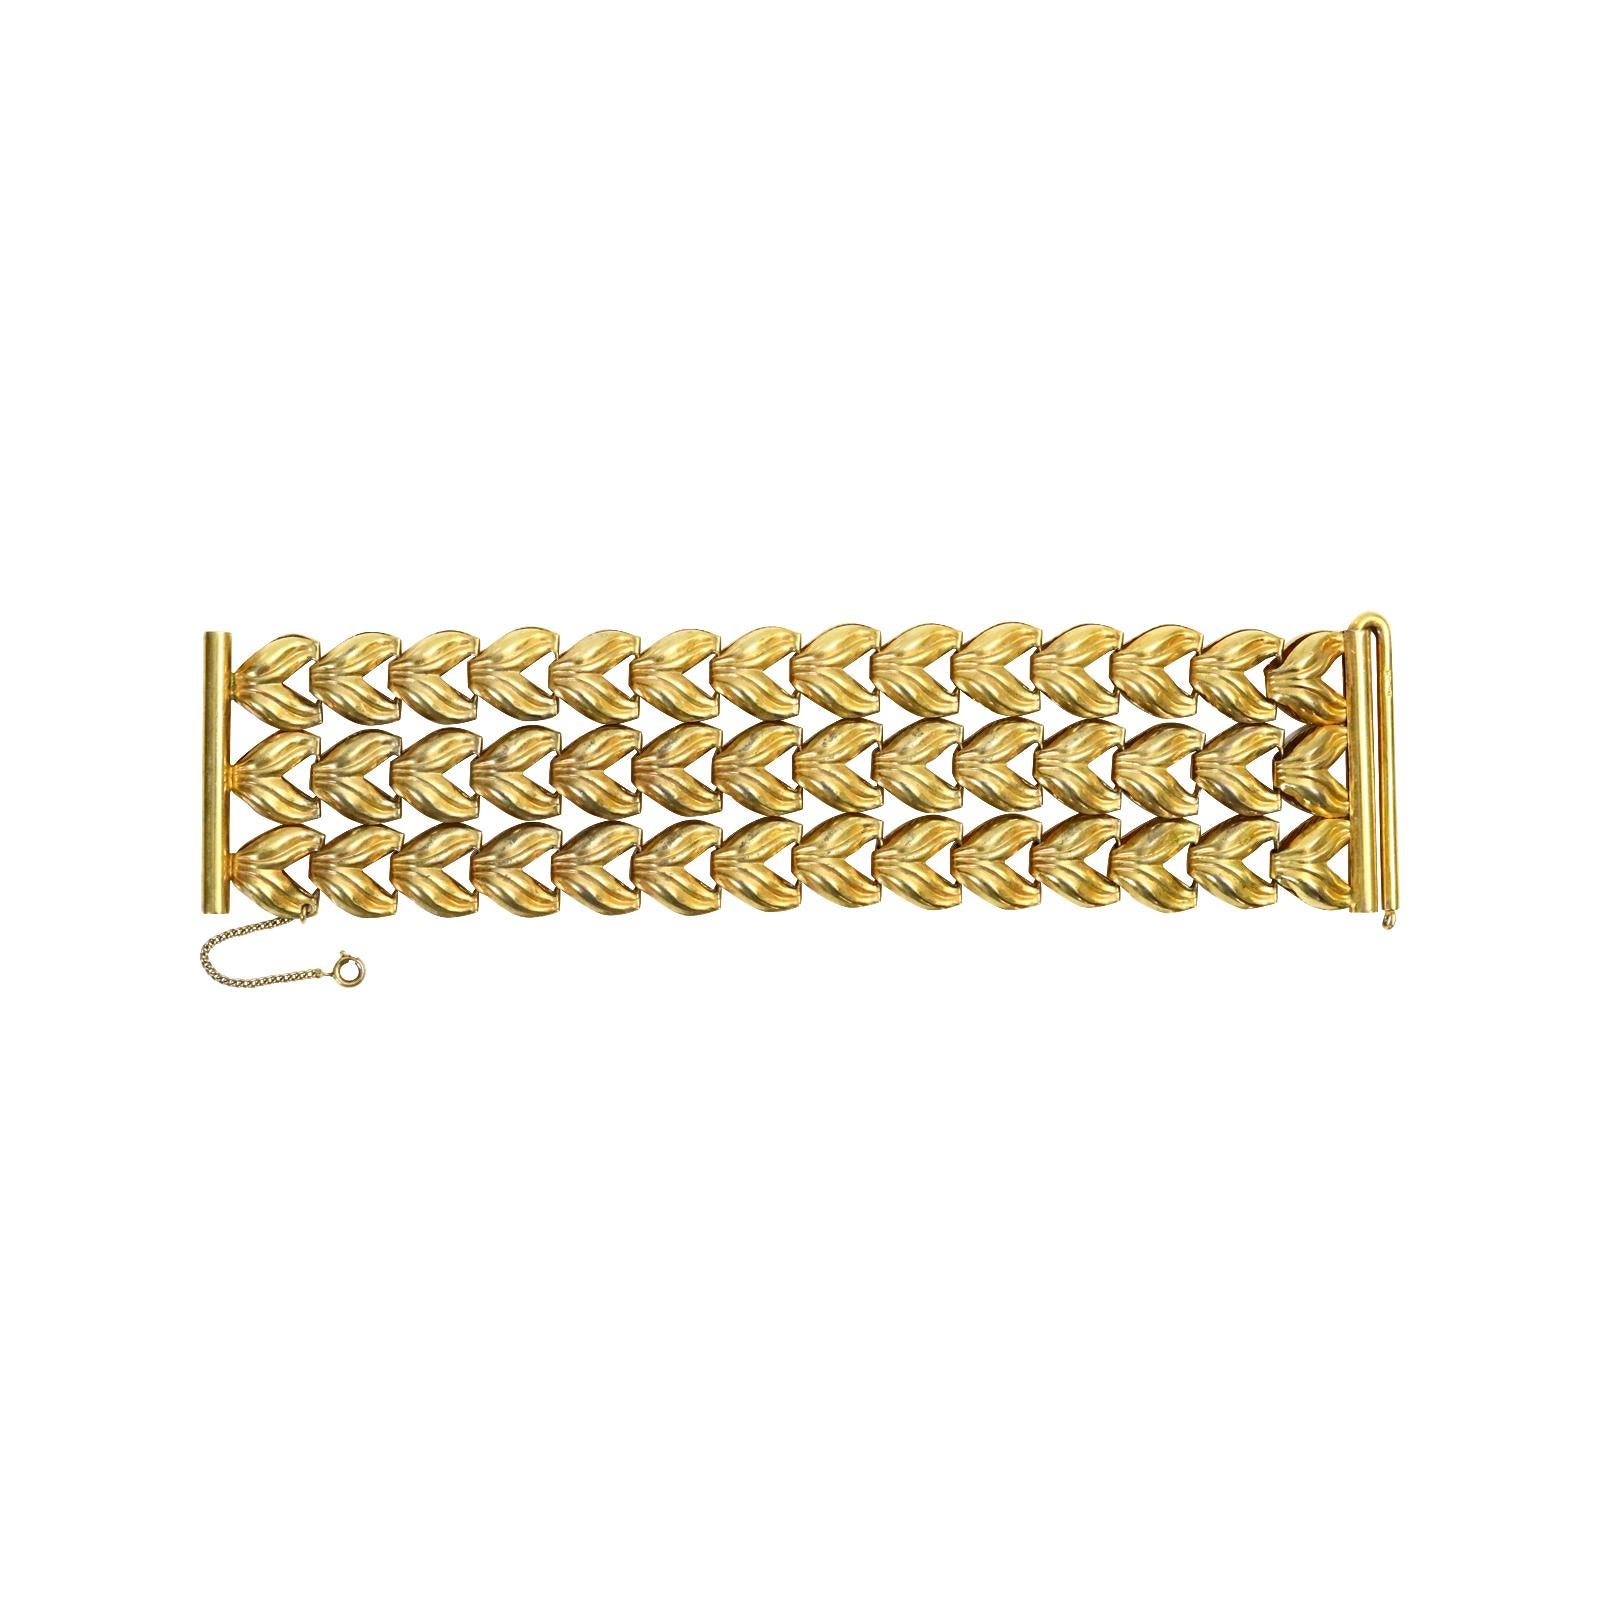 Vintage Napier Gold Tone 3 Row Bracelet Circa 1960s In Good Condition For Sale In New York, NY